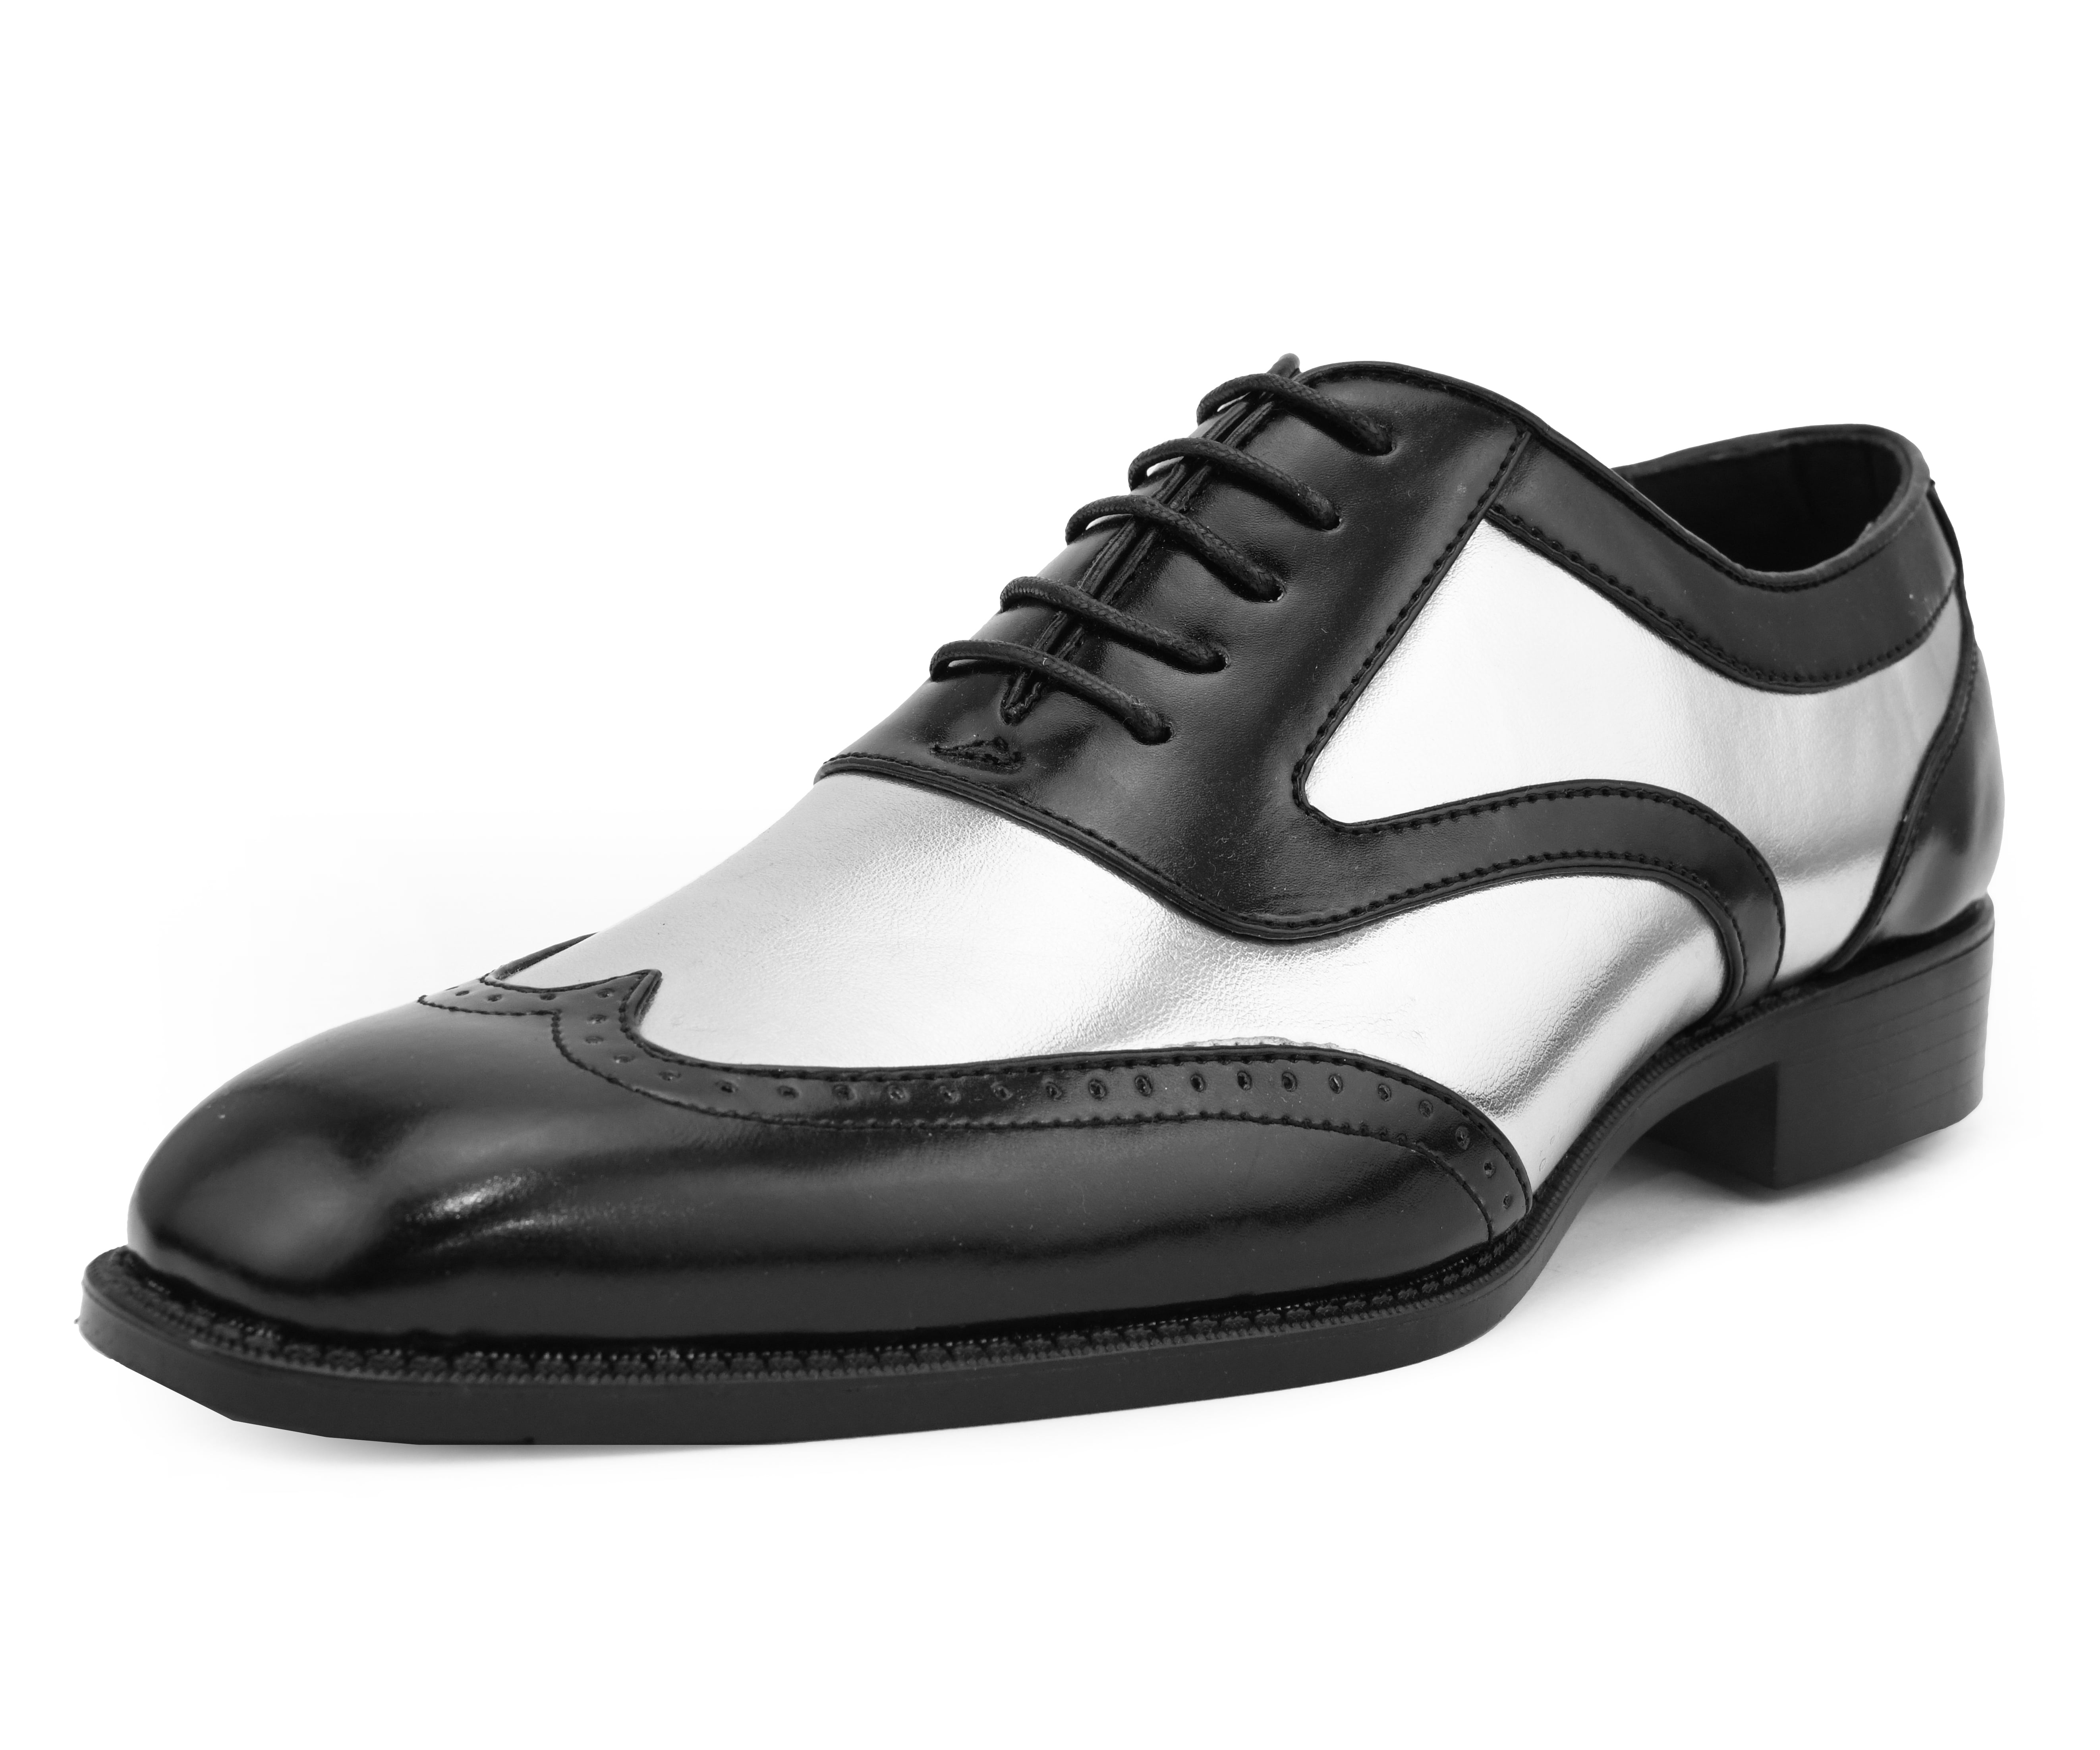 Mens Laced Shoes Shiny Patent Italian Design Silver Metal Classic Smart Formal 